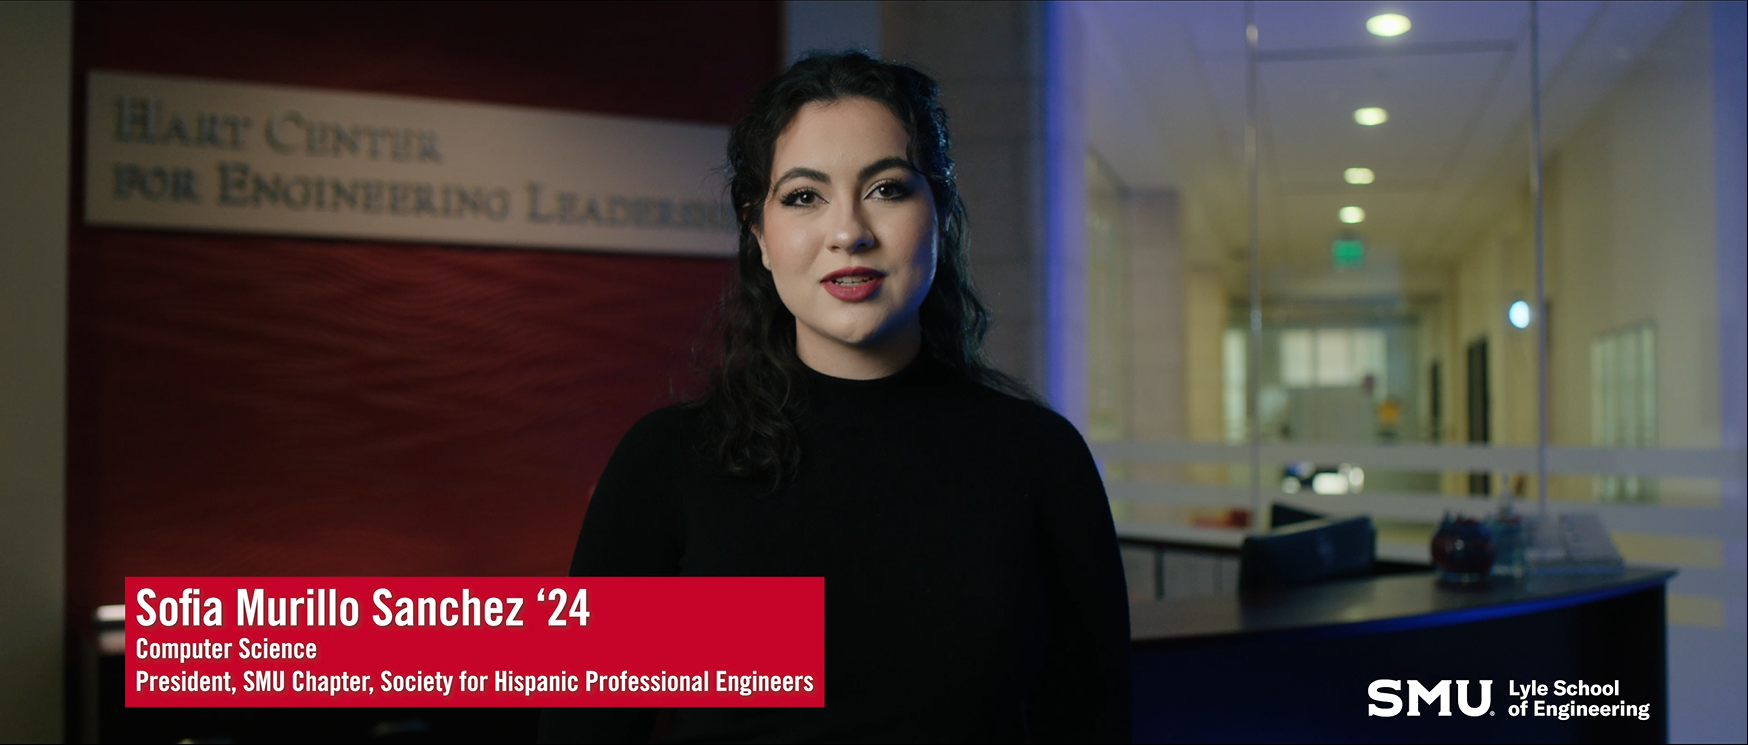 Sofia Murillo Sanchez in the Hart Center for Engineering Leadership